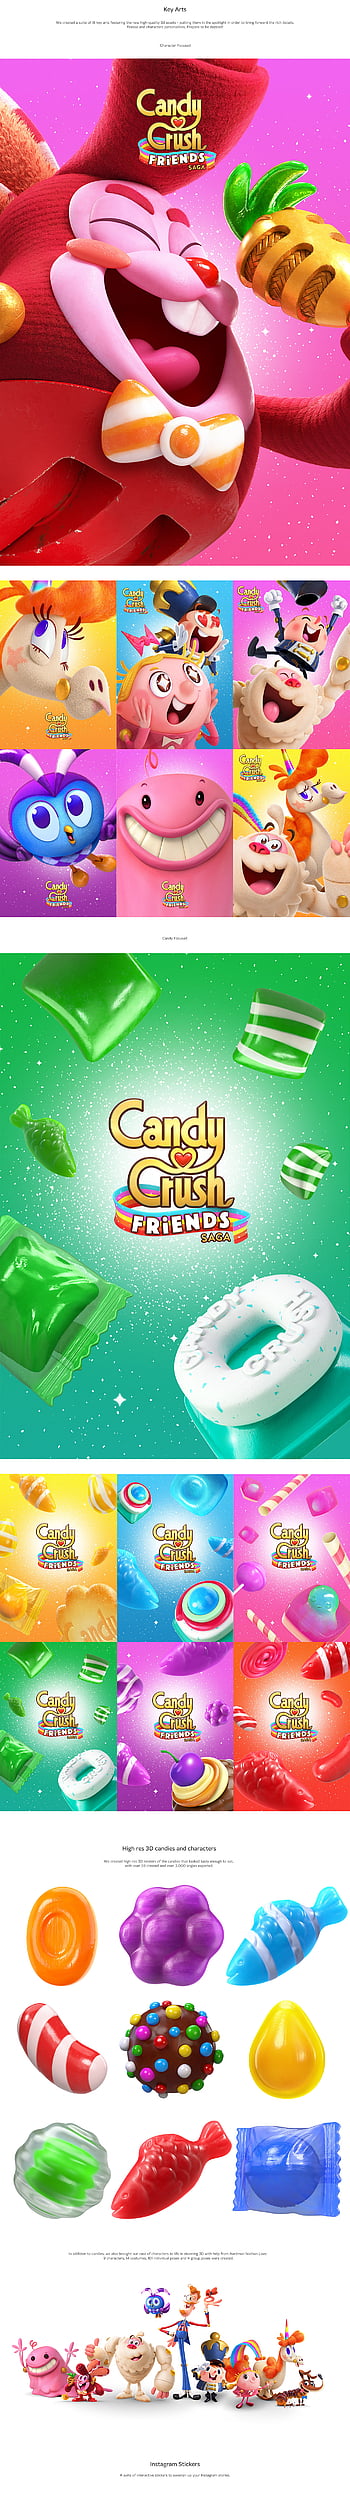 CANDY CRUSH SAGA match online puzzle family wallpaper, 1920x1080, 421728